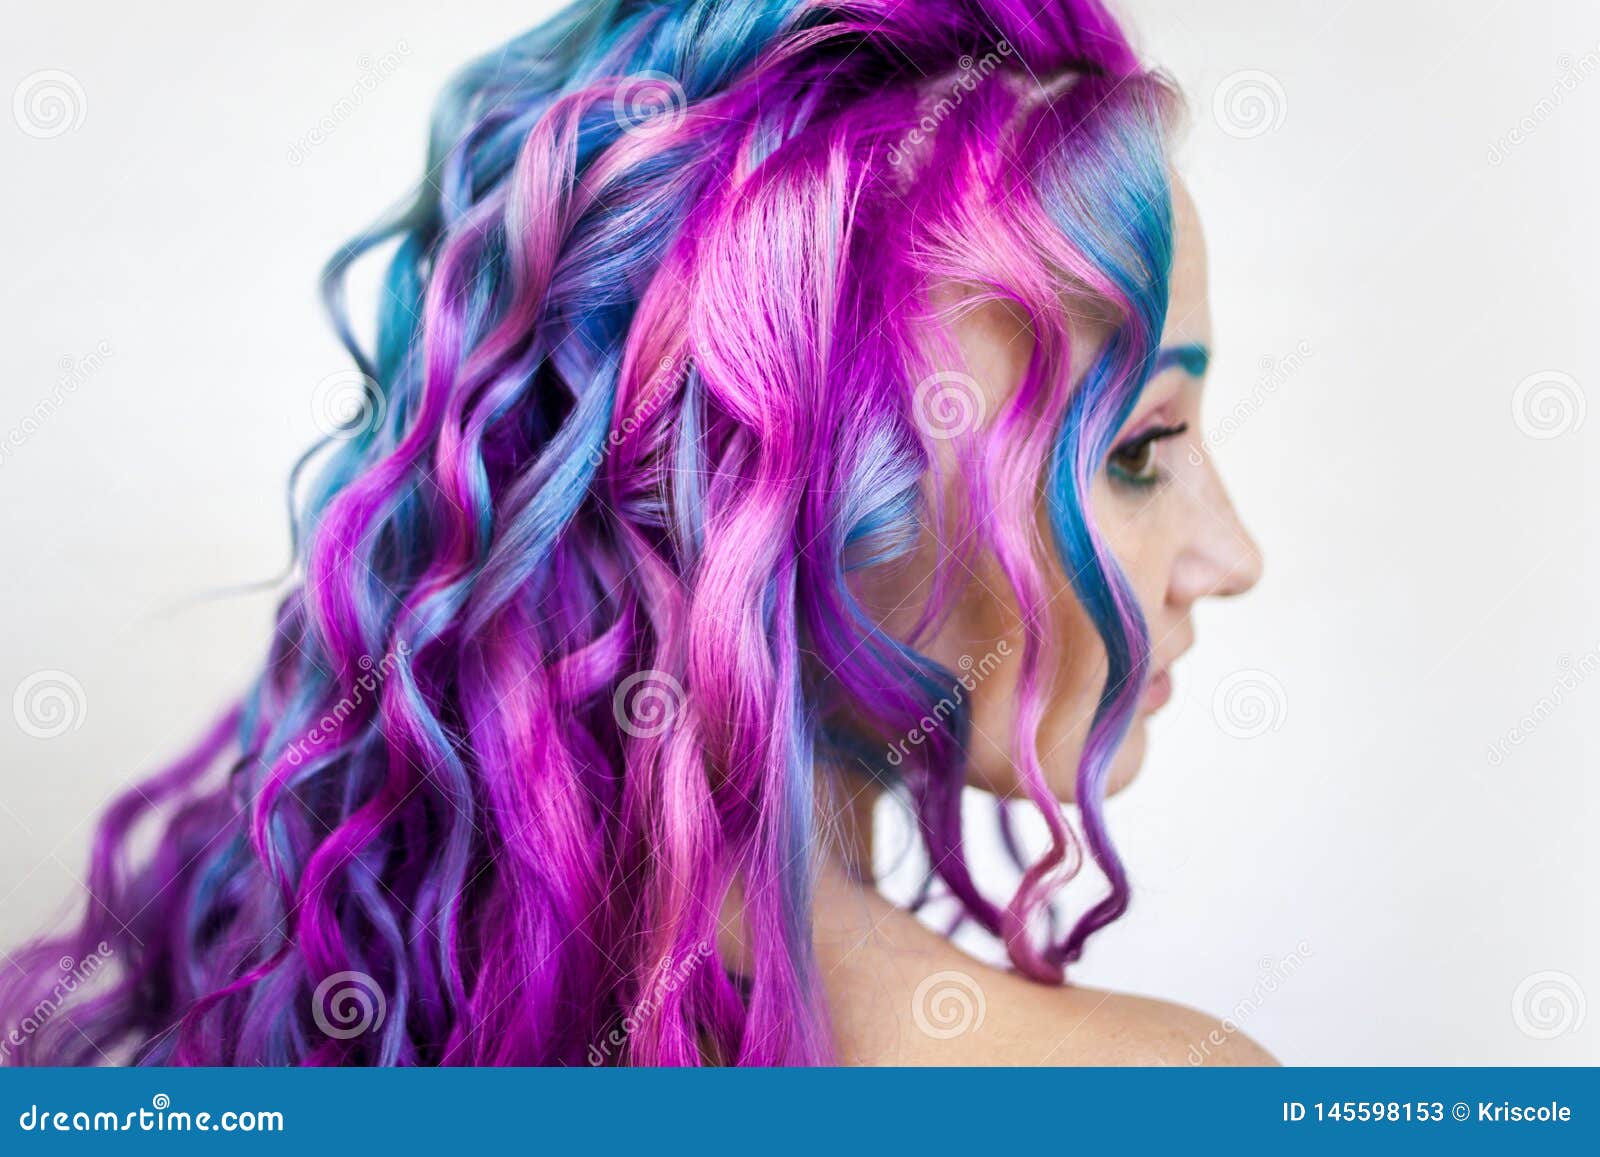 1. Pink and Blue Hair Highlights: 10 Gorgeous Ideas for Your Next Look - wide 6